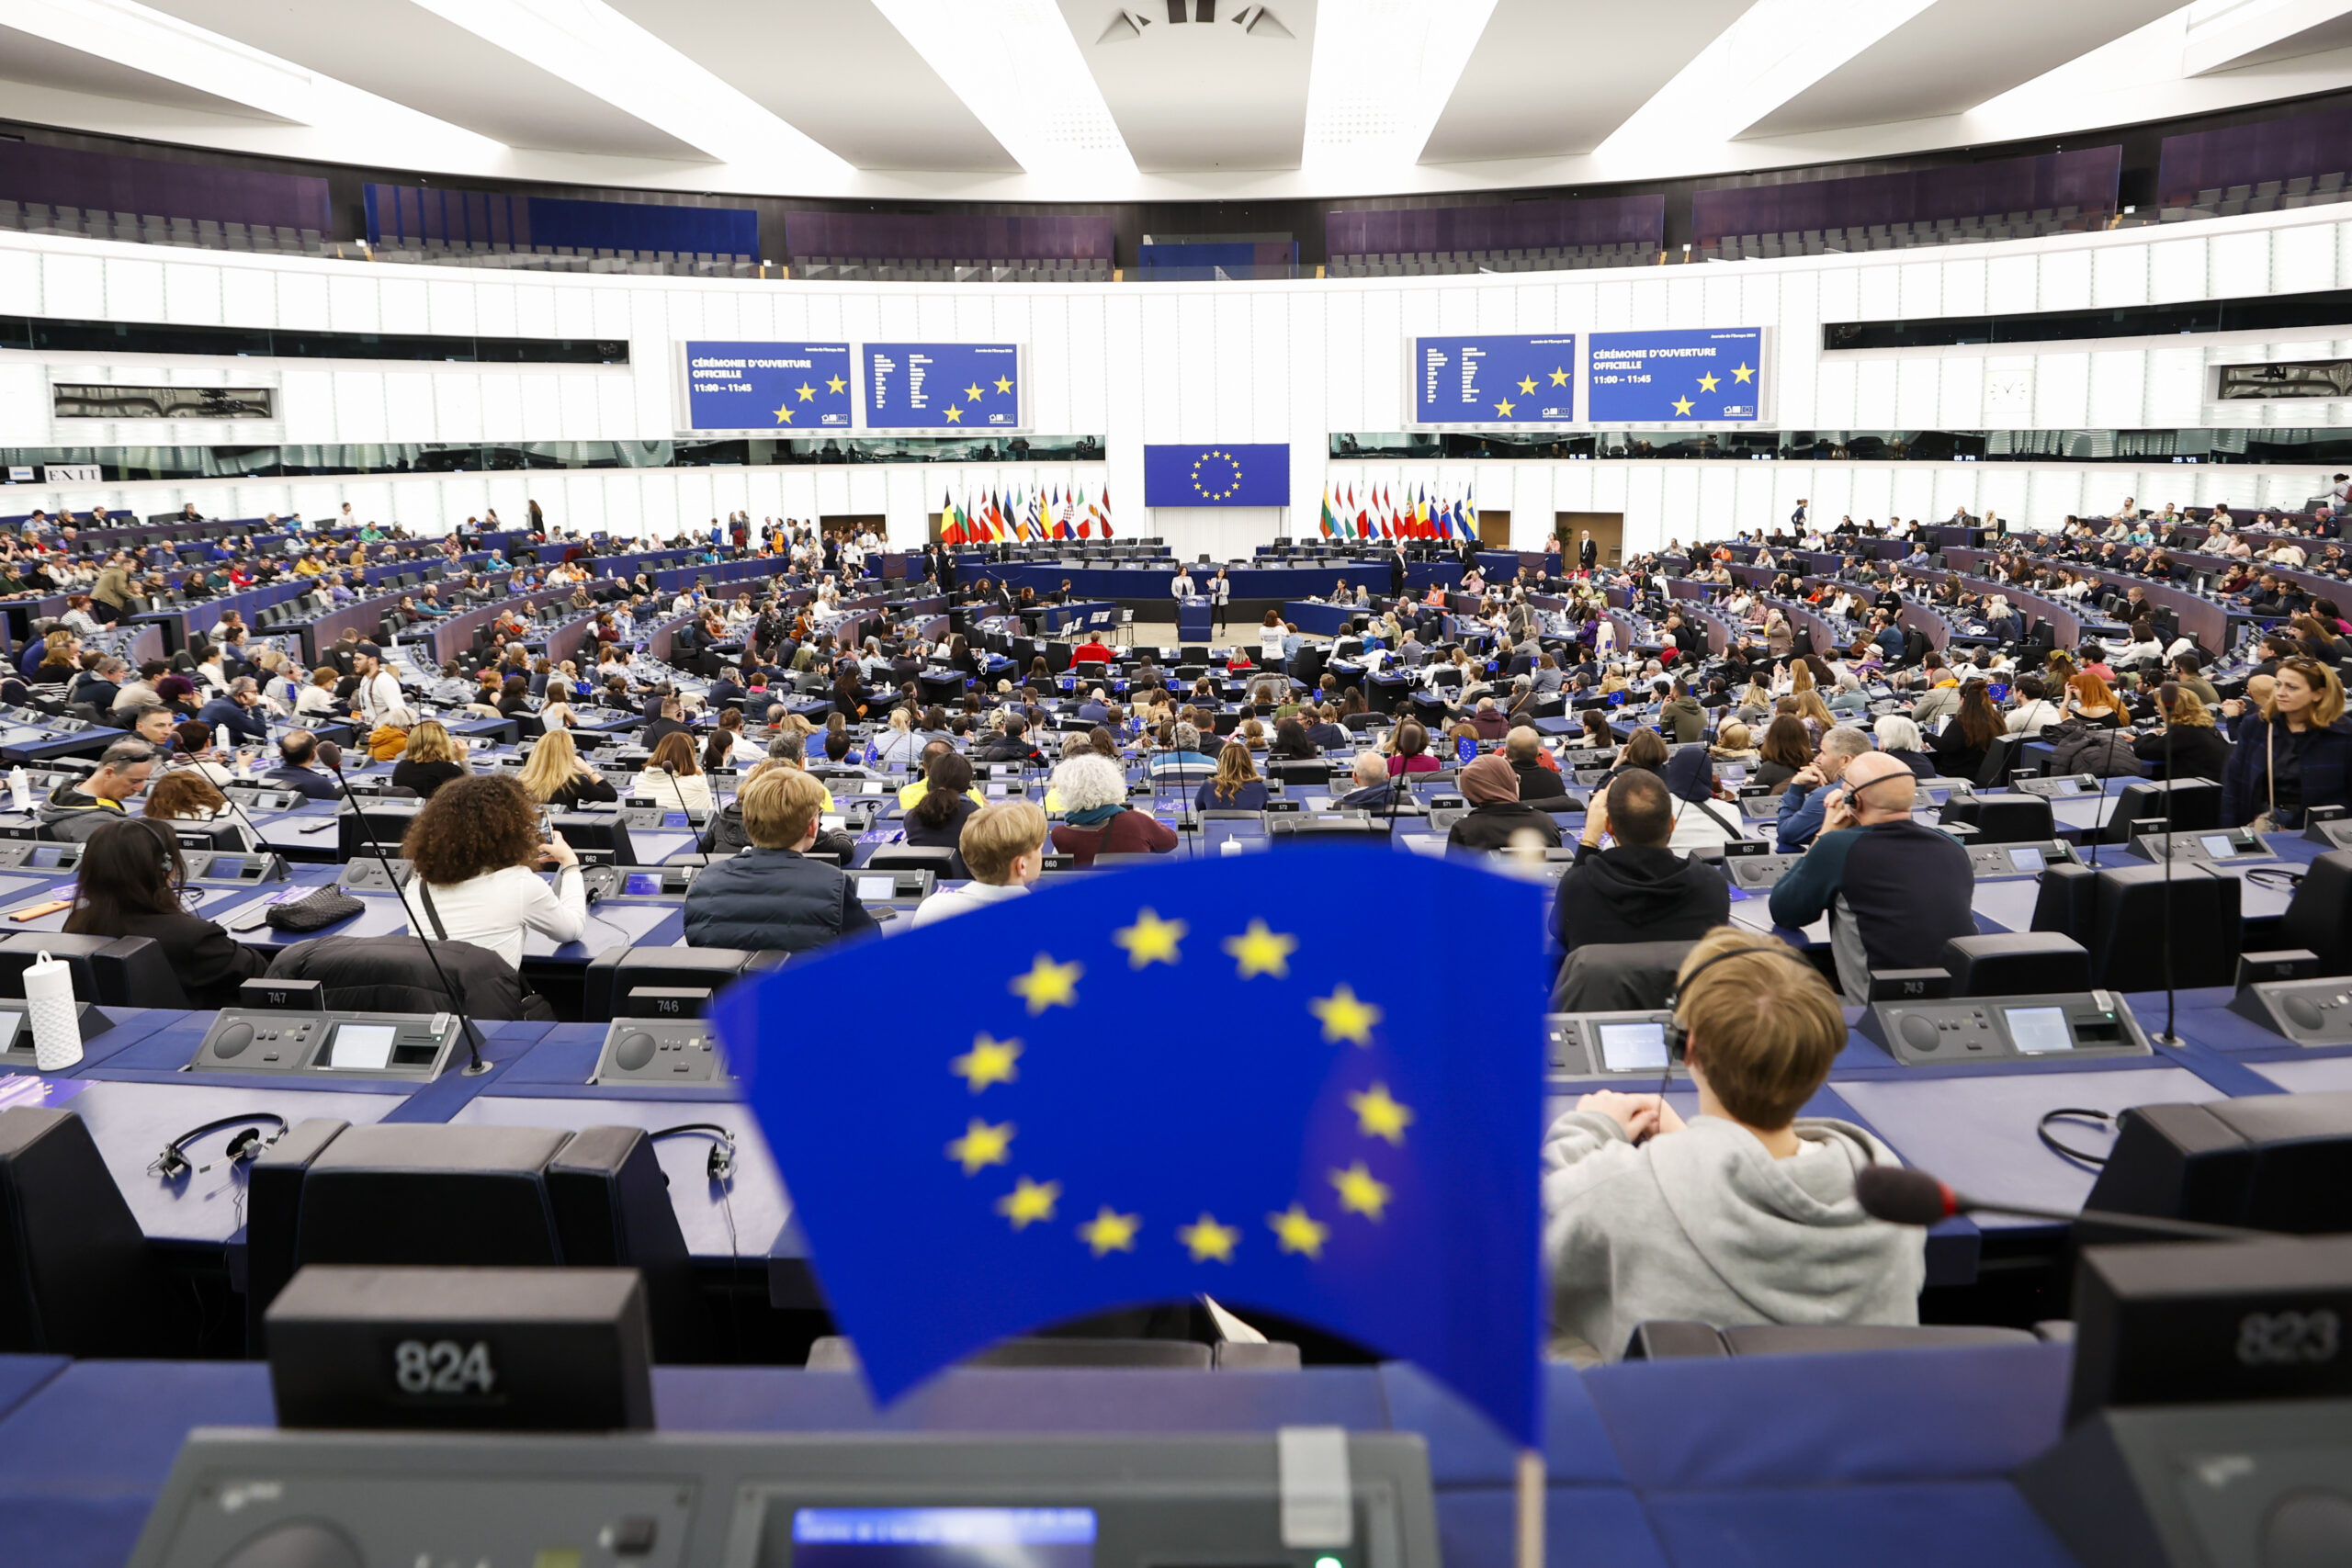 Beyond rhetoric: A closer look at the work of the members of the European Parliament